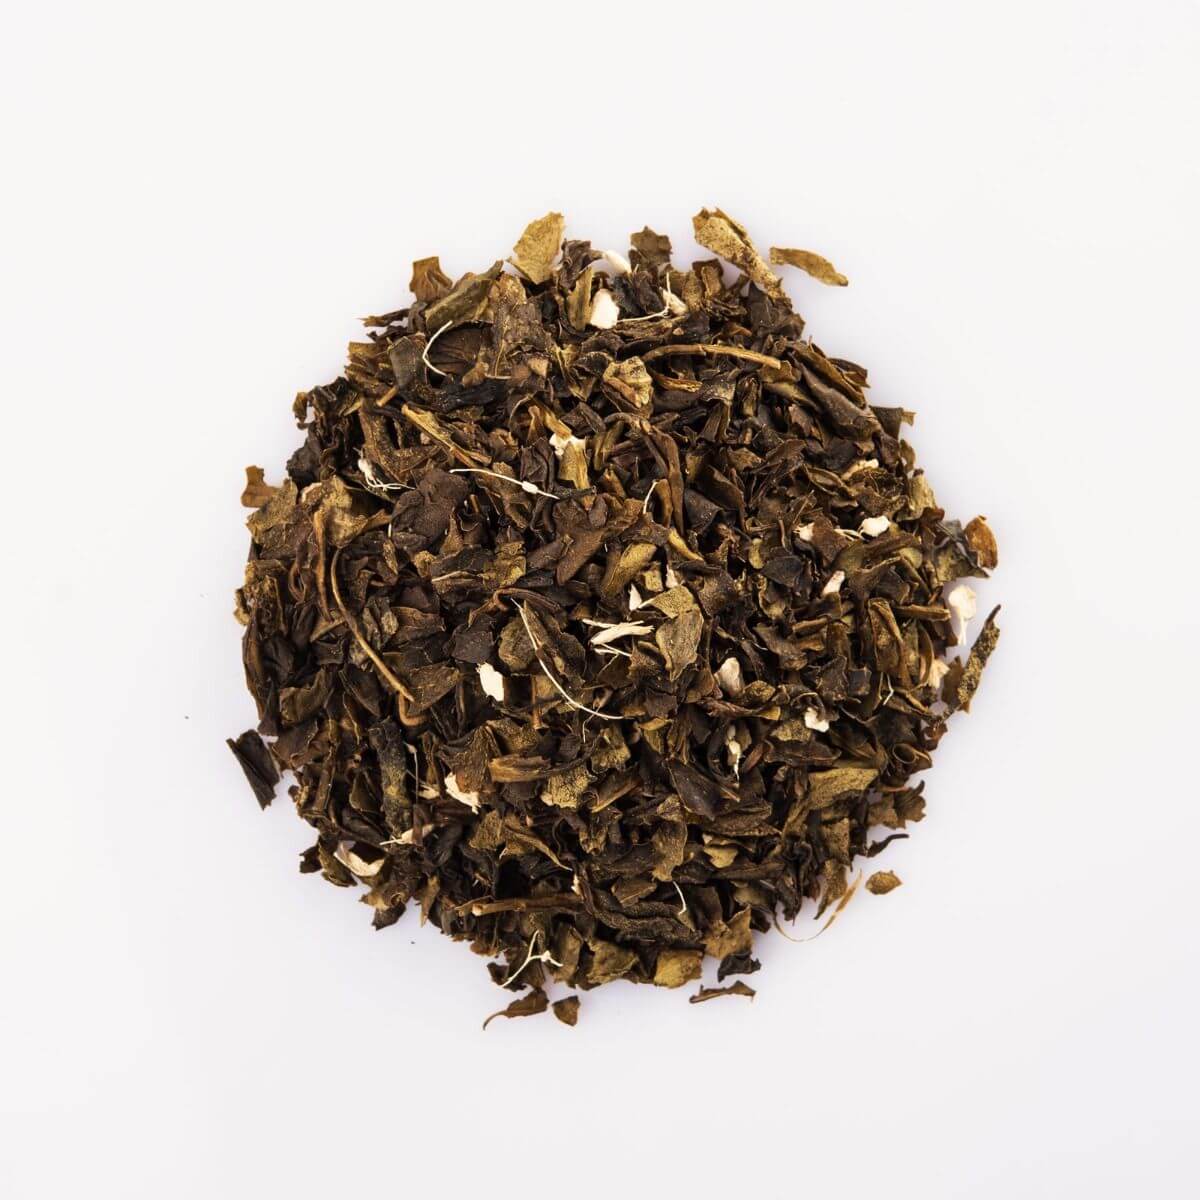 Dilmah Ceylon green tea with lychee and ginger leaf tea 75g